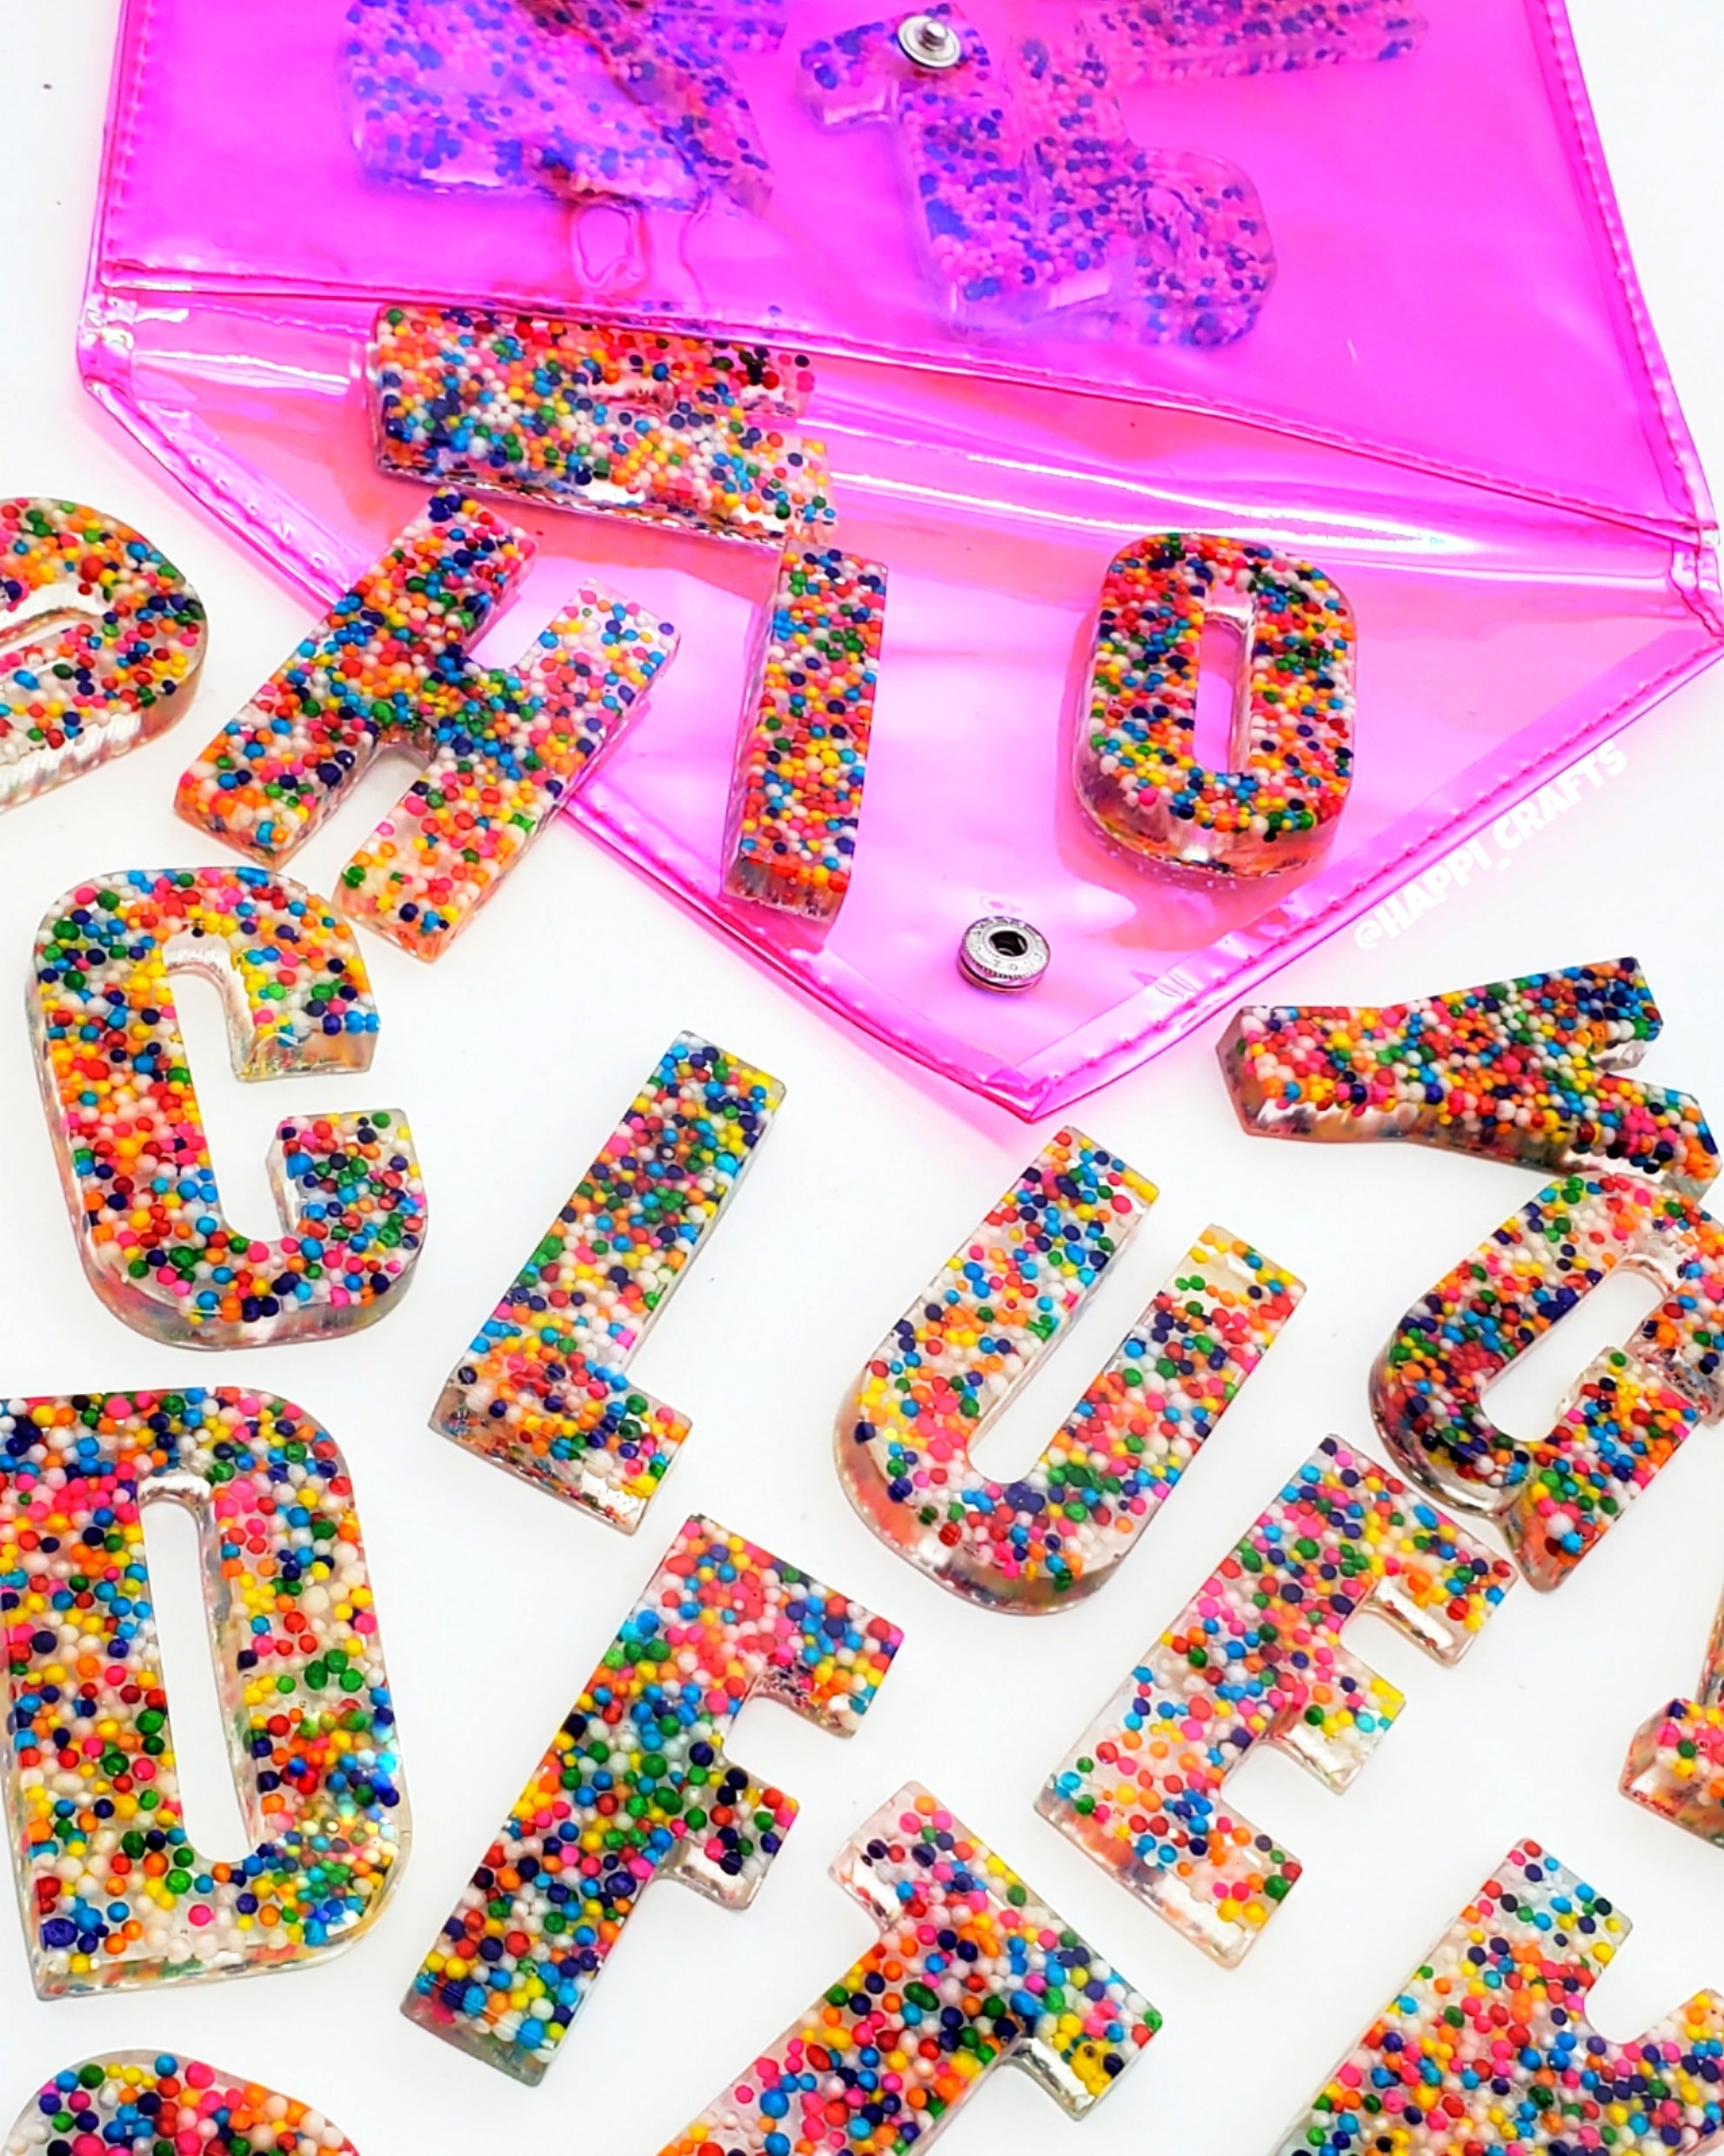 A Set of Large Uppercase Sprinkle Letters